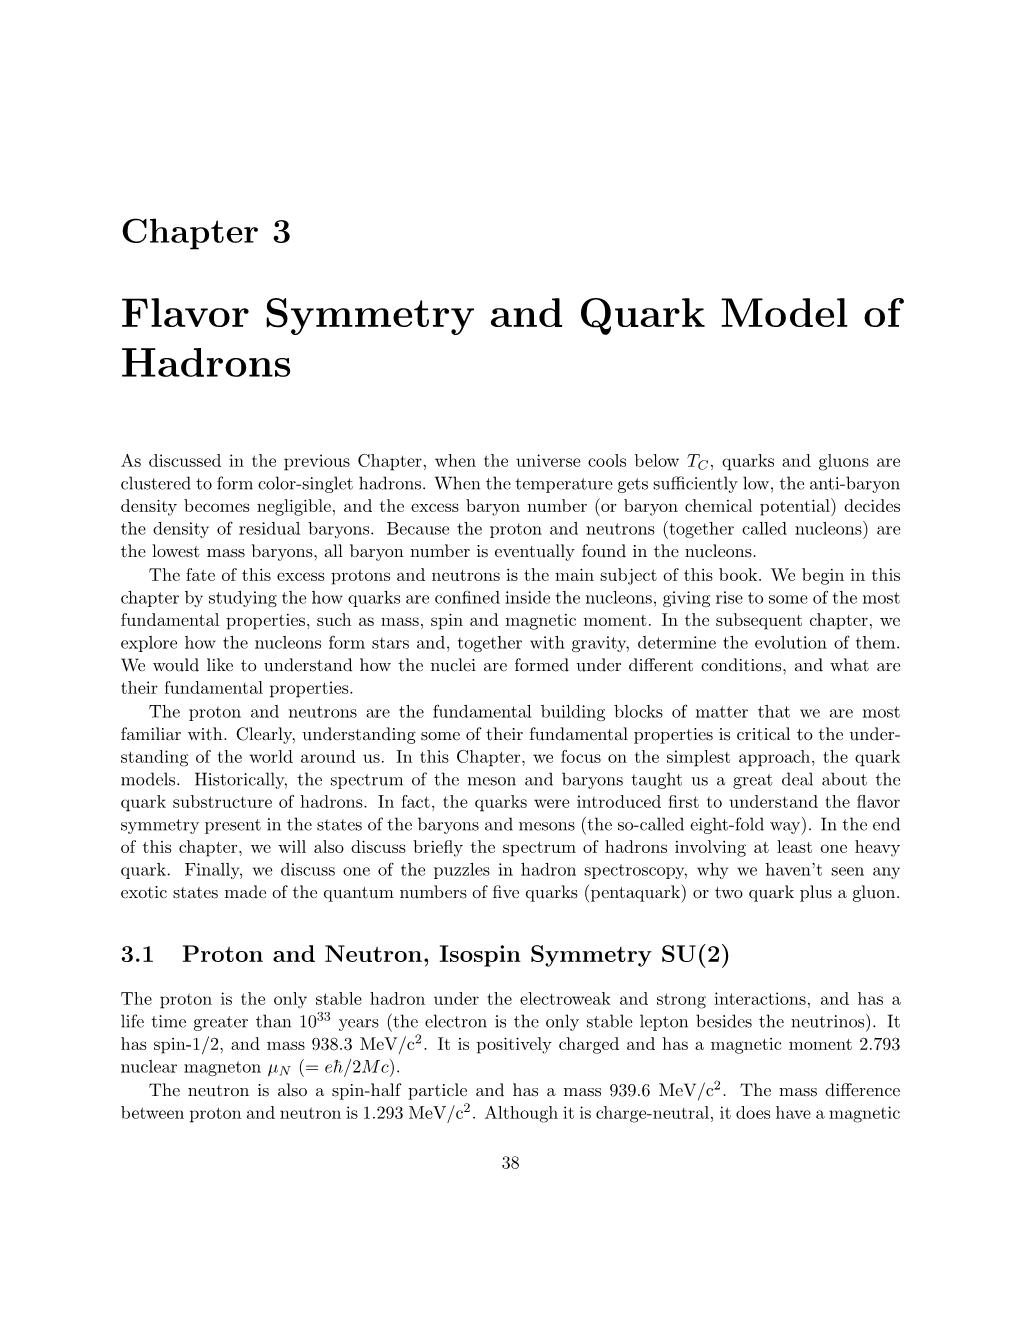 Flavor Symmetry and Quark Model of Hadrons